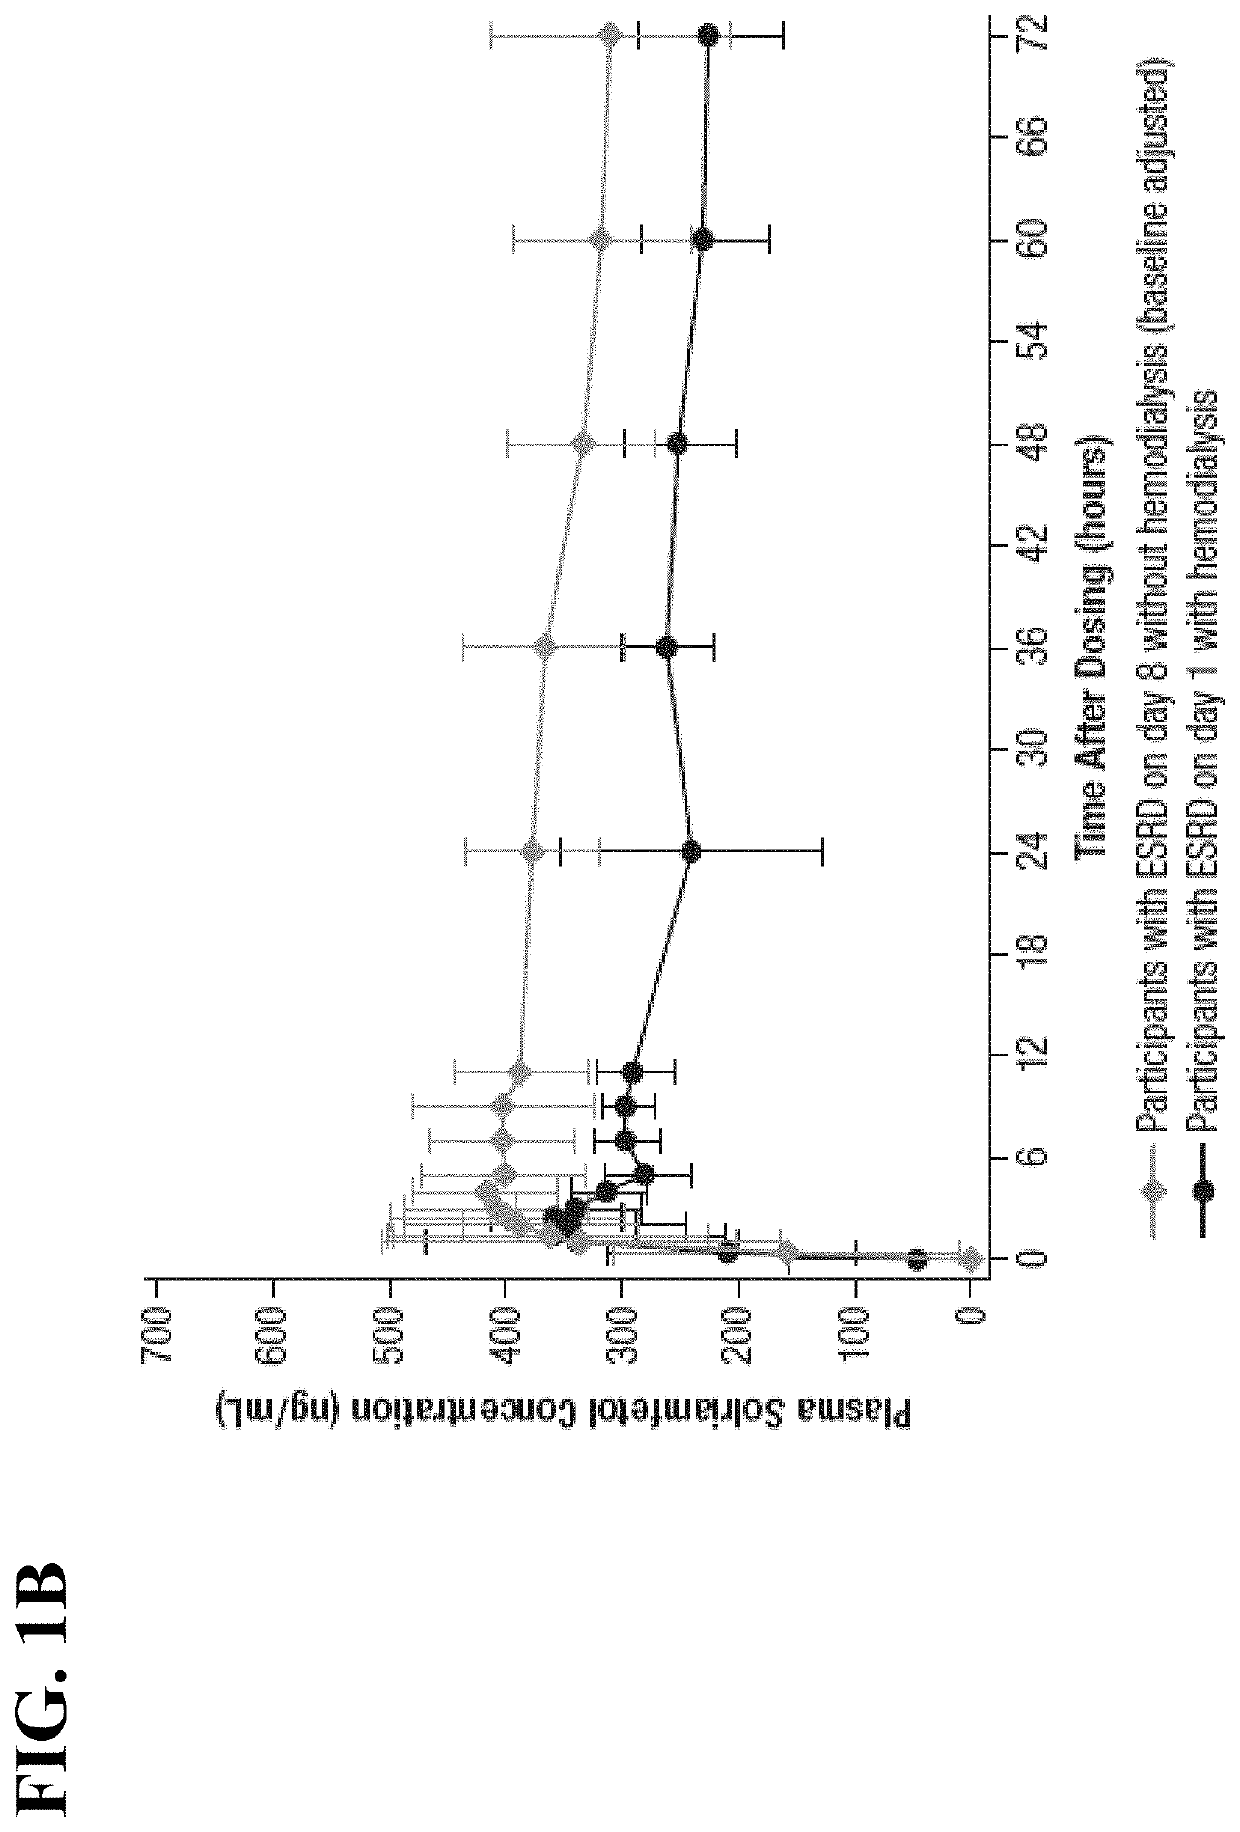 Methods of providing solriamfetol therapy to subjects with impaired renal function